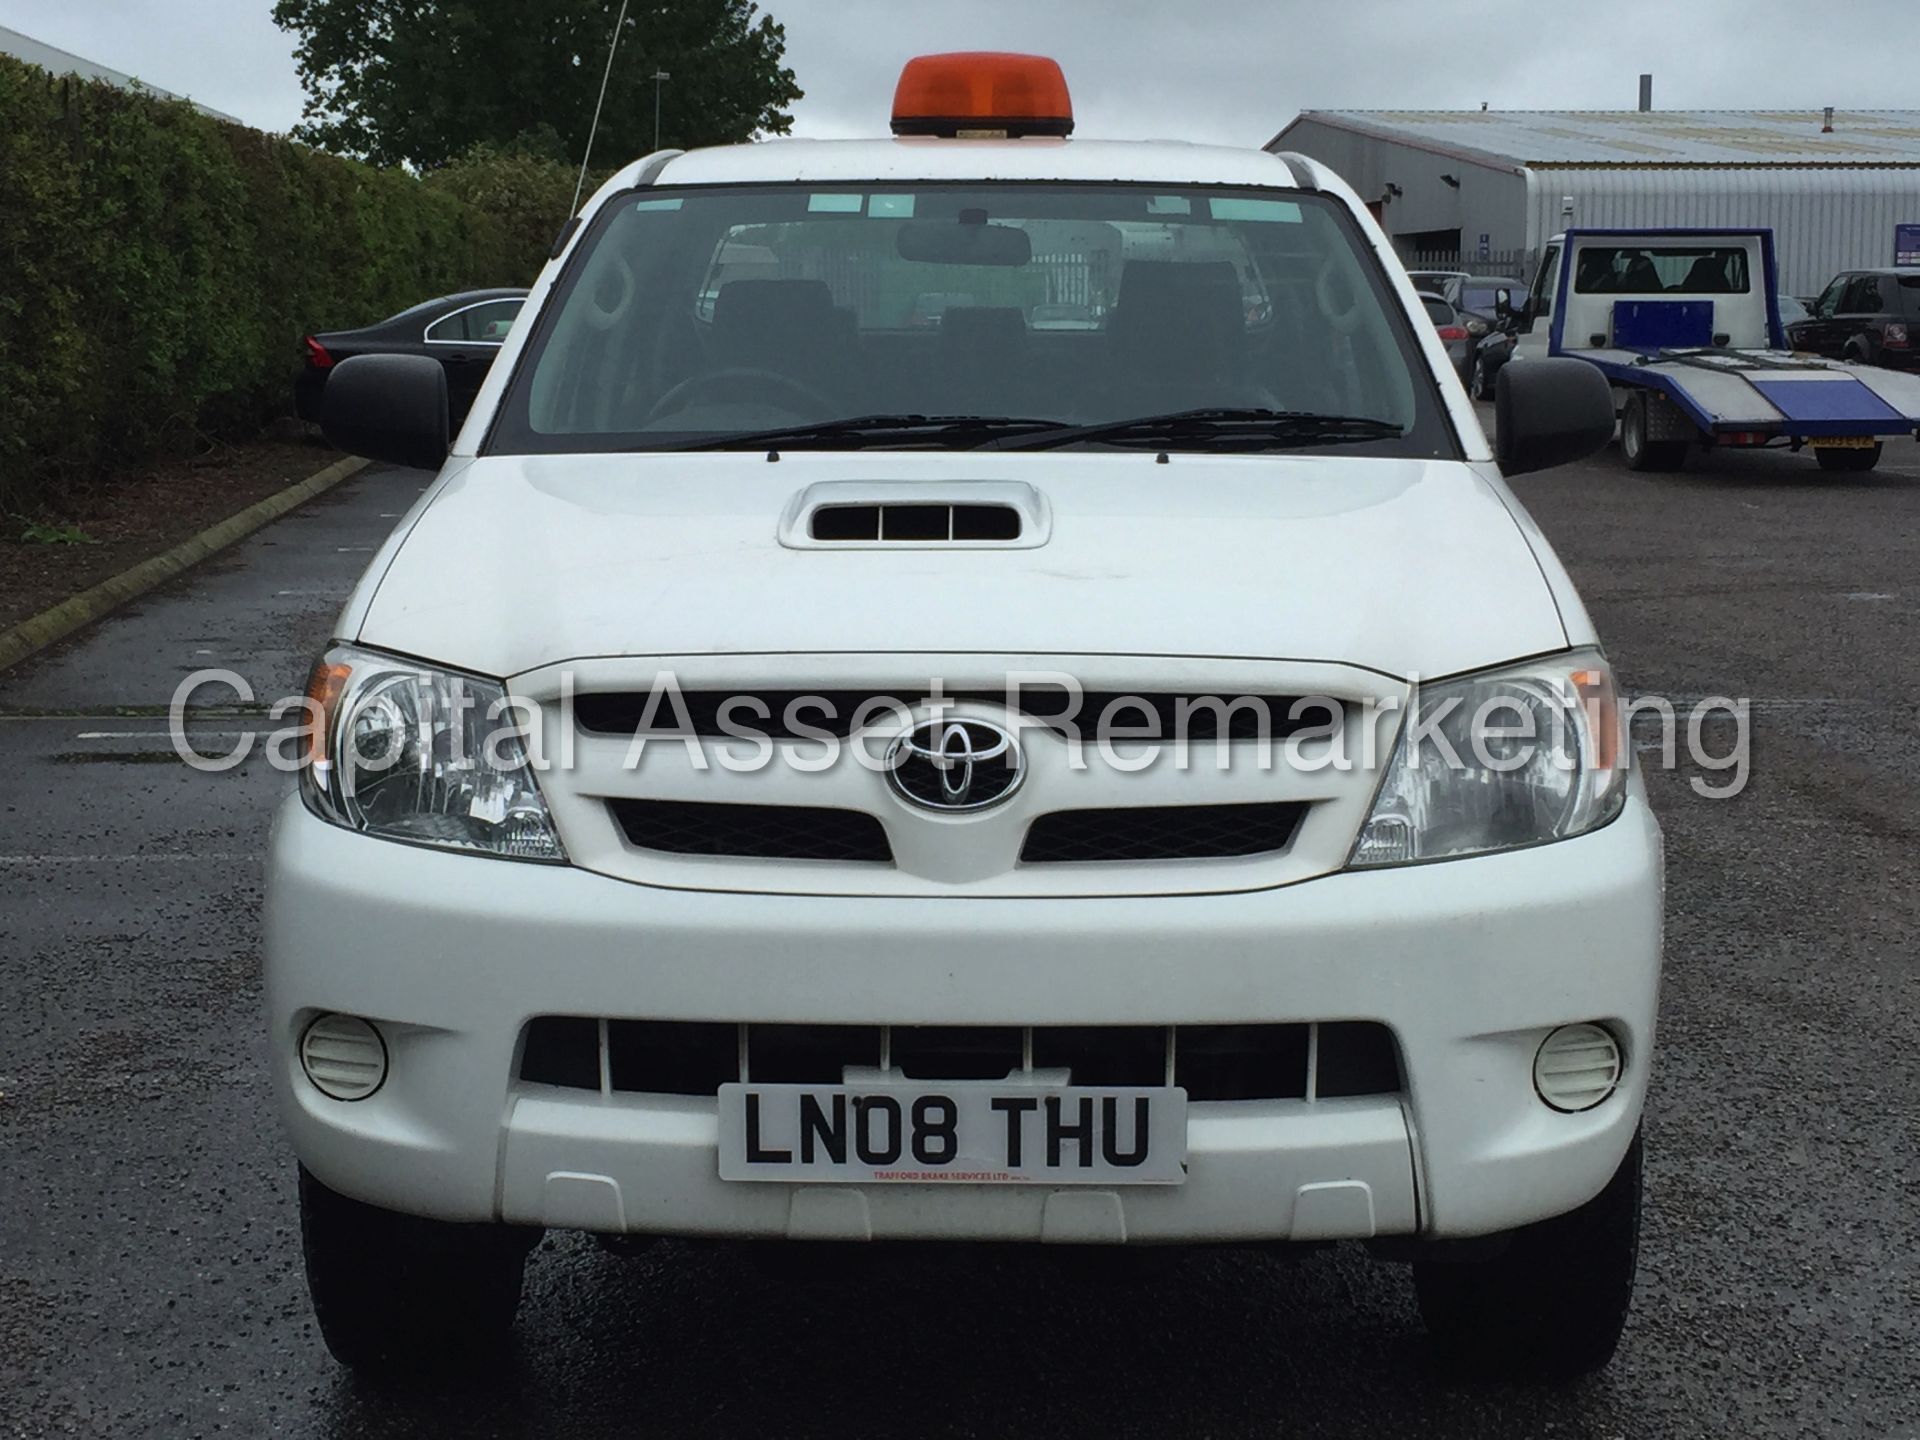 TOYOTA HILUX D-4D '171 BHP' (2008 - 08 REG) DOUBLE CAB PICK-UP (1 OWNER FROM NEW) - Image 4 of 23